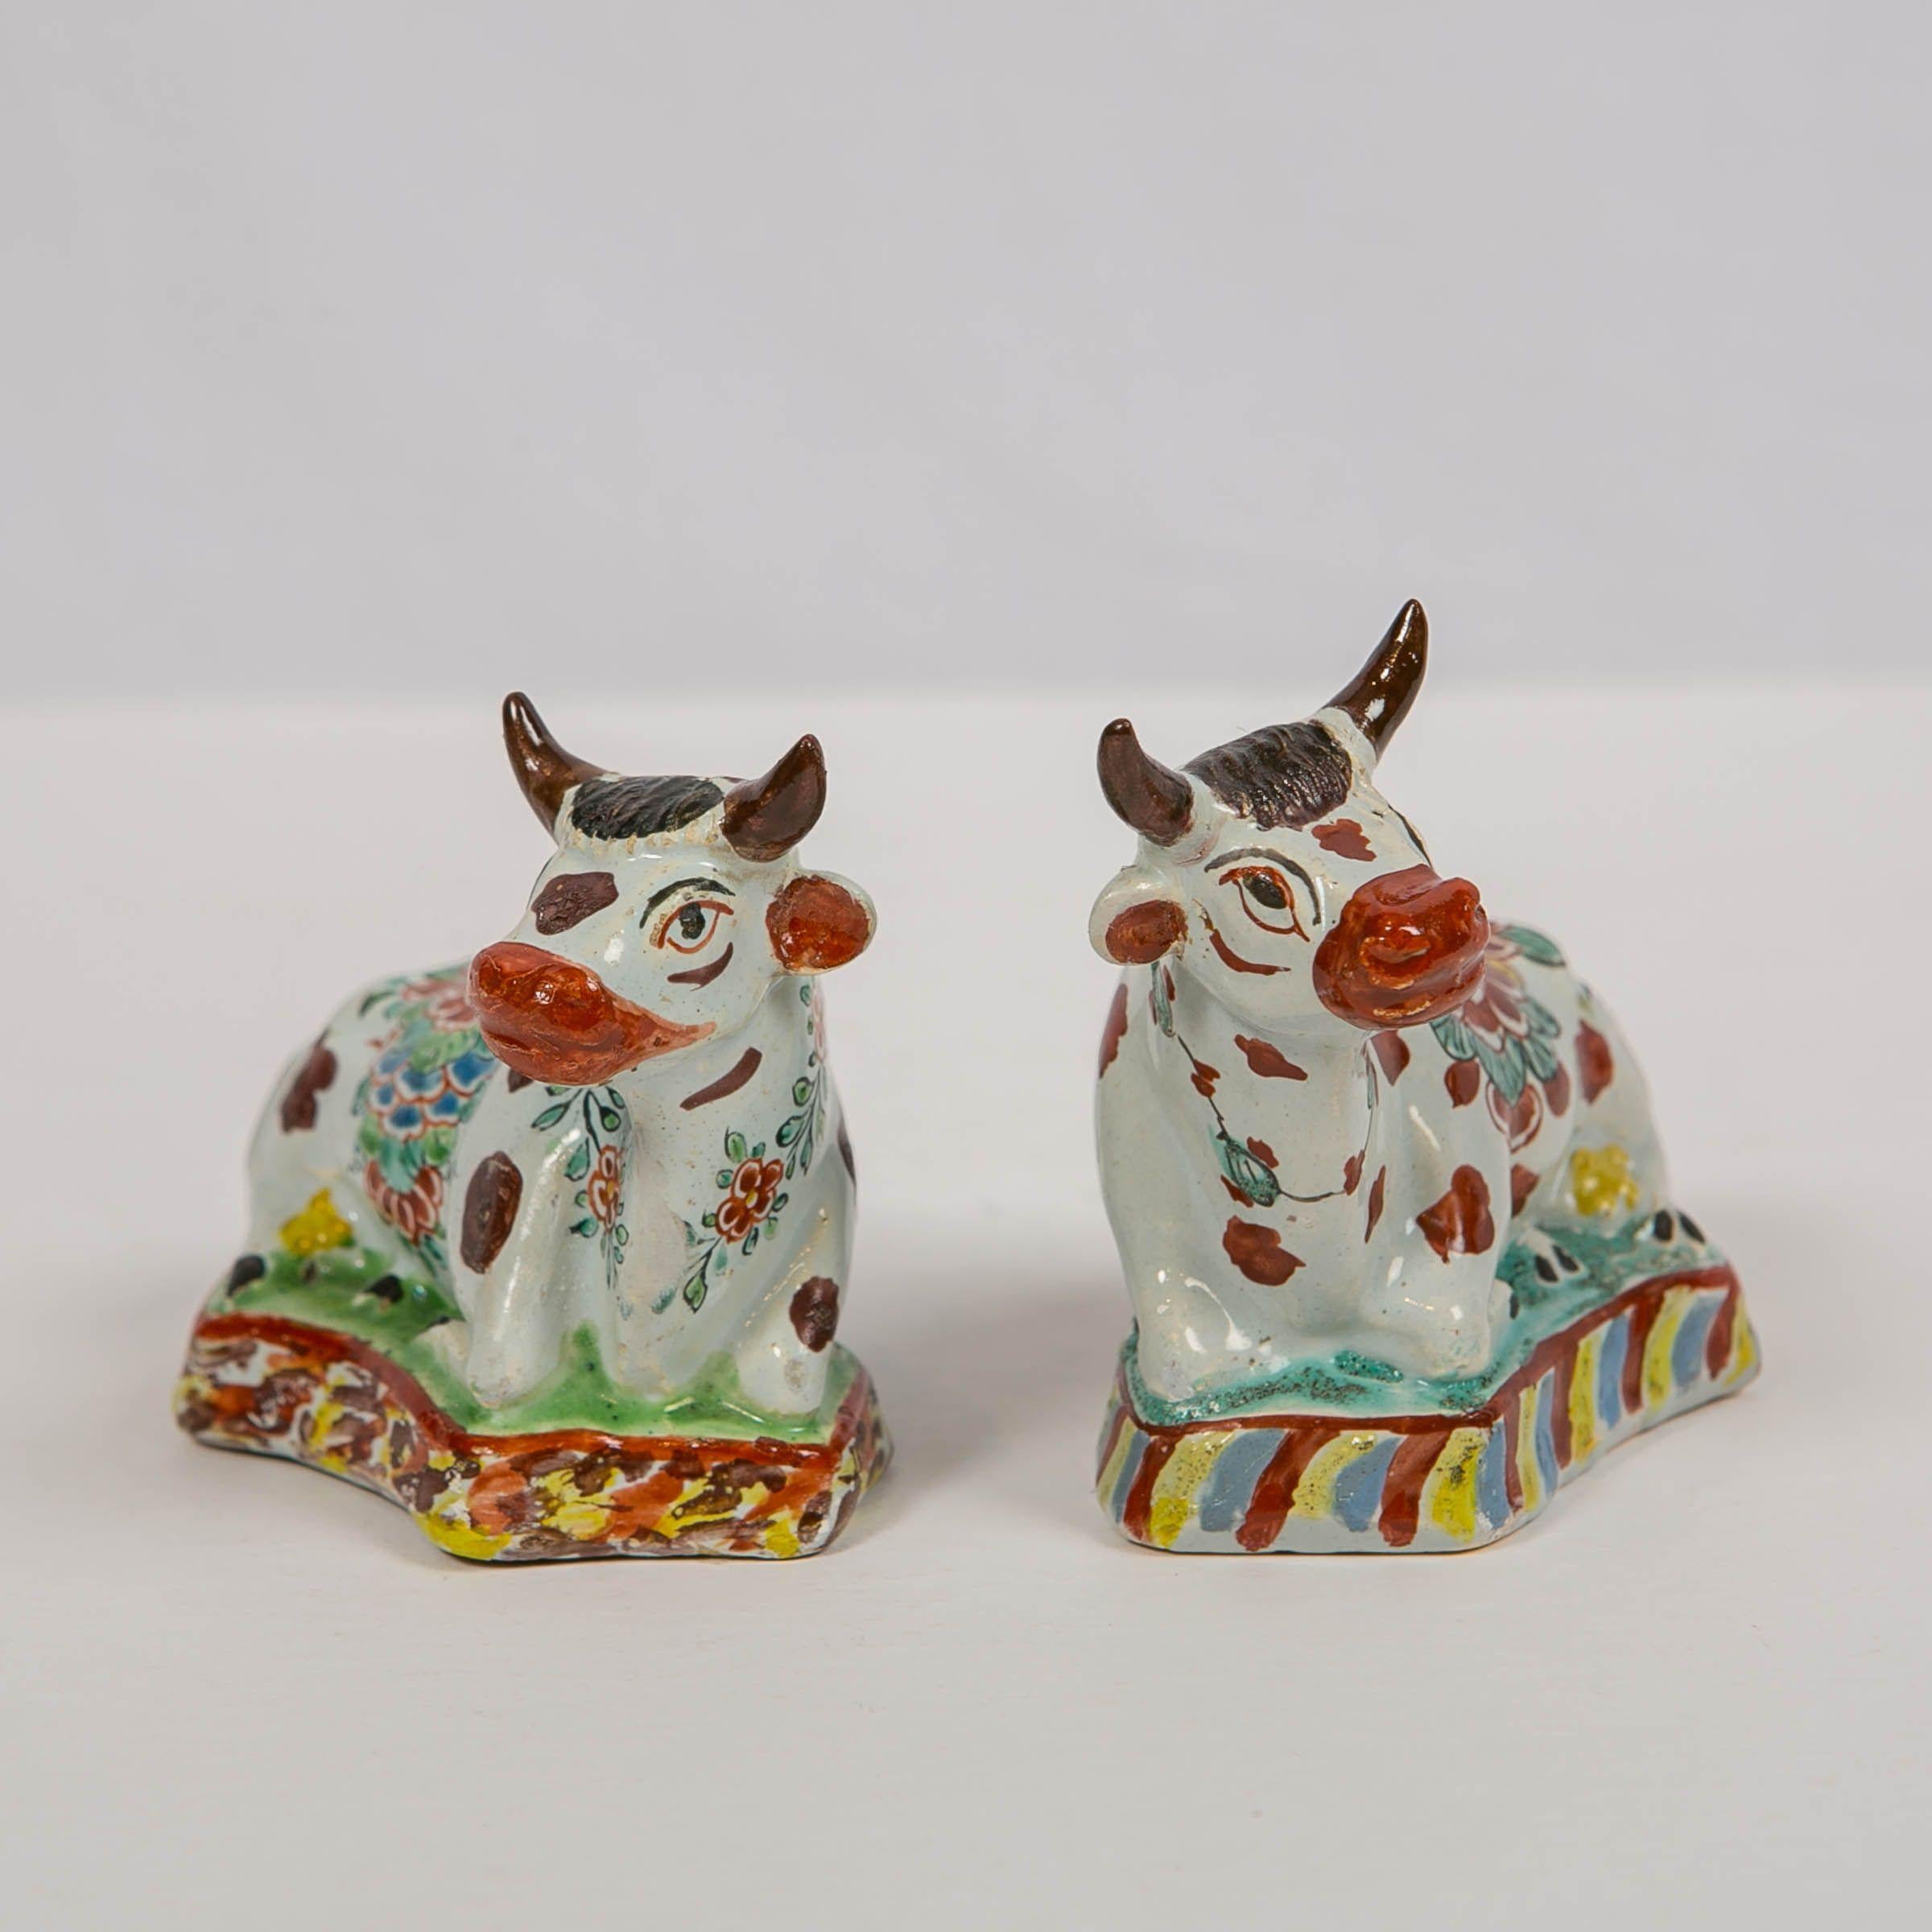 Rococo Pair of Dutch Delft Cows Painted in Polychrome Petit Feu Colors Made circa 1760